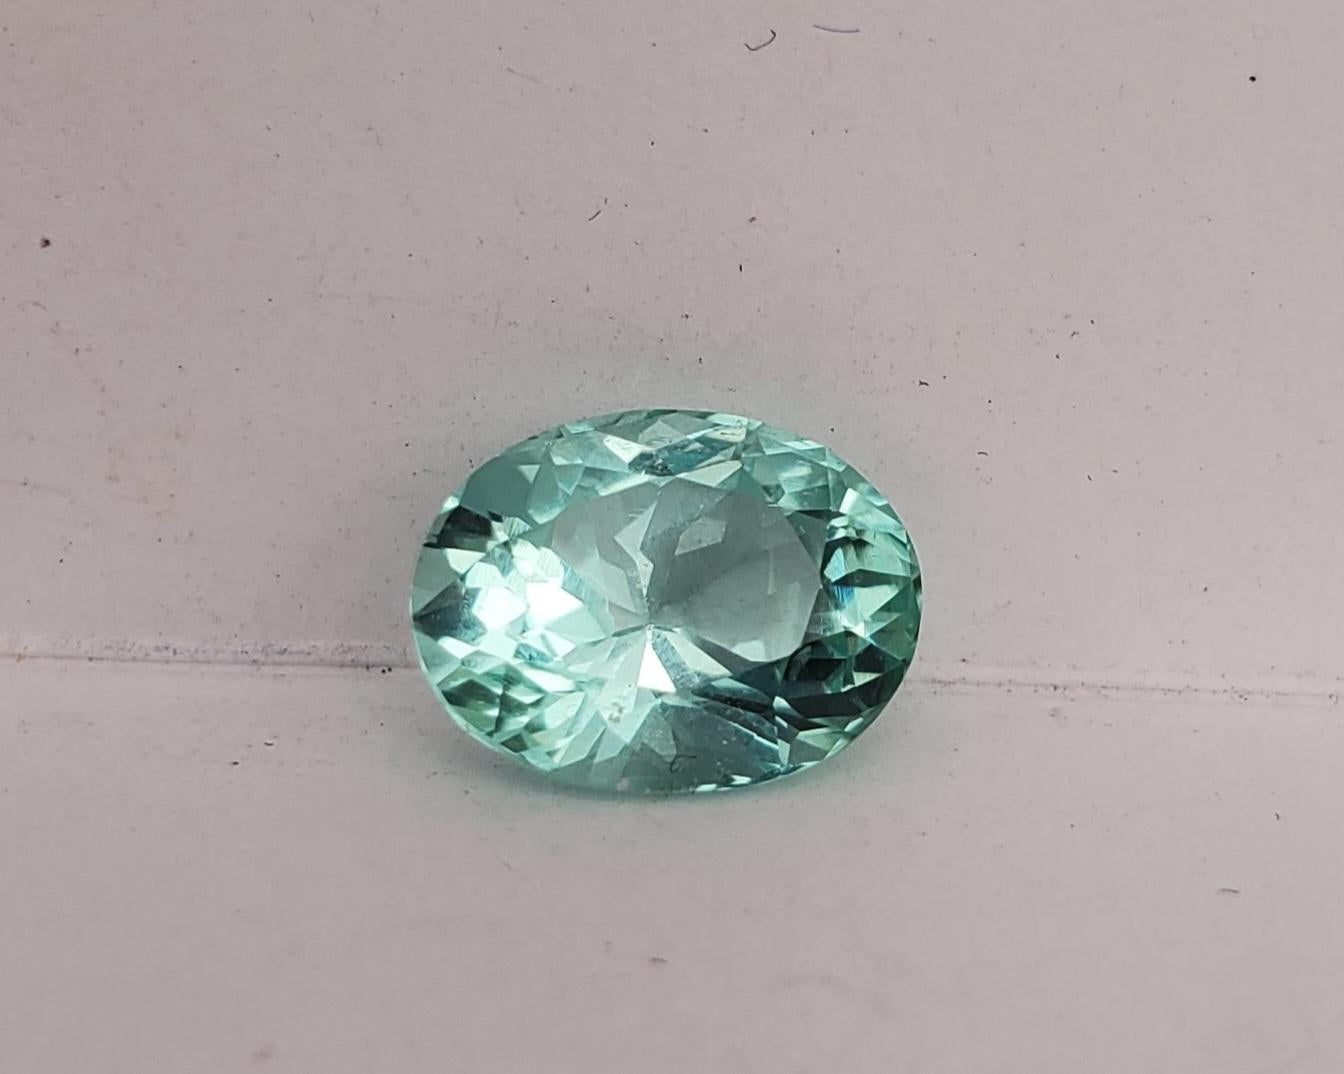 This gorgeous Mozambique Paraiba-type tourmaline weighs 3.21 carats and displays a beautiful neon bluish green color. Photos do not do the glowing aqua color of this gem justice. The mixed brilliant cut oval helps every facet reflect light with